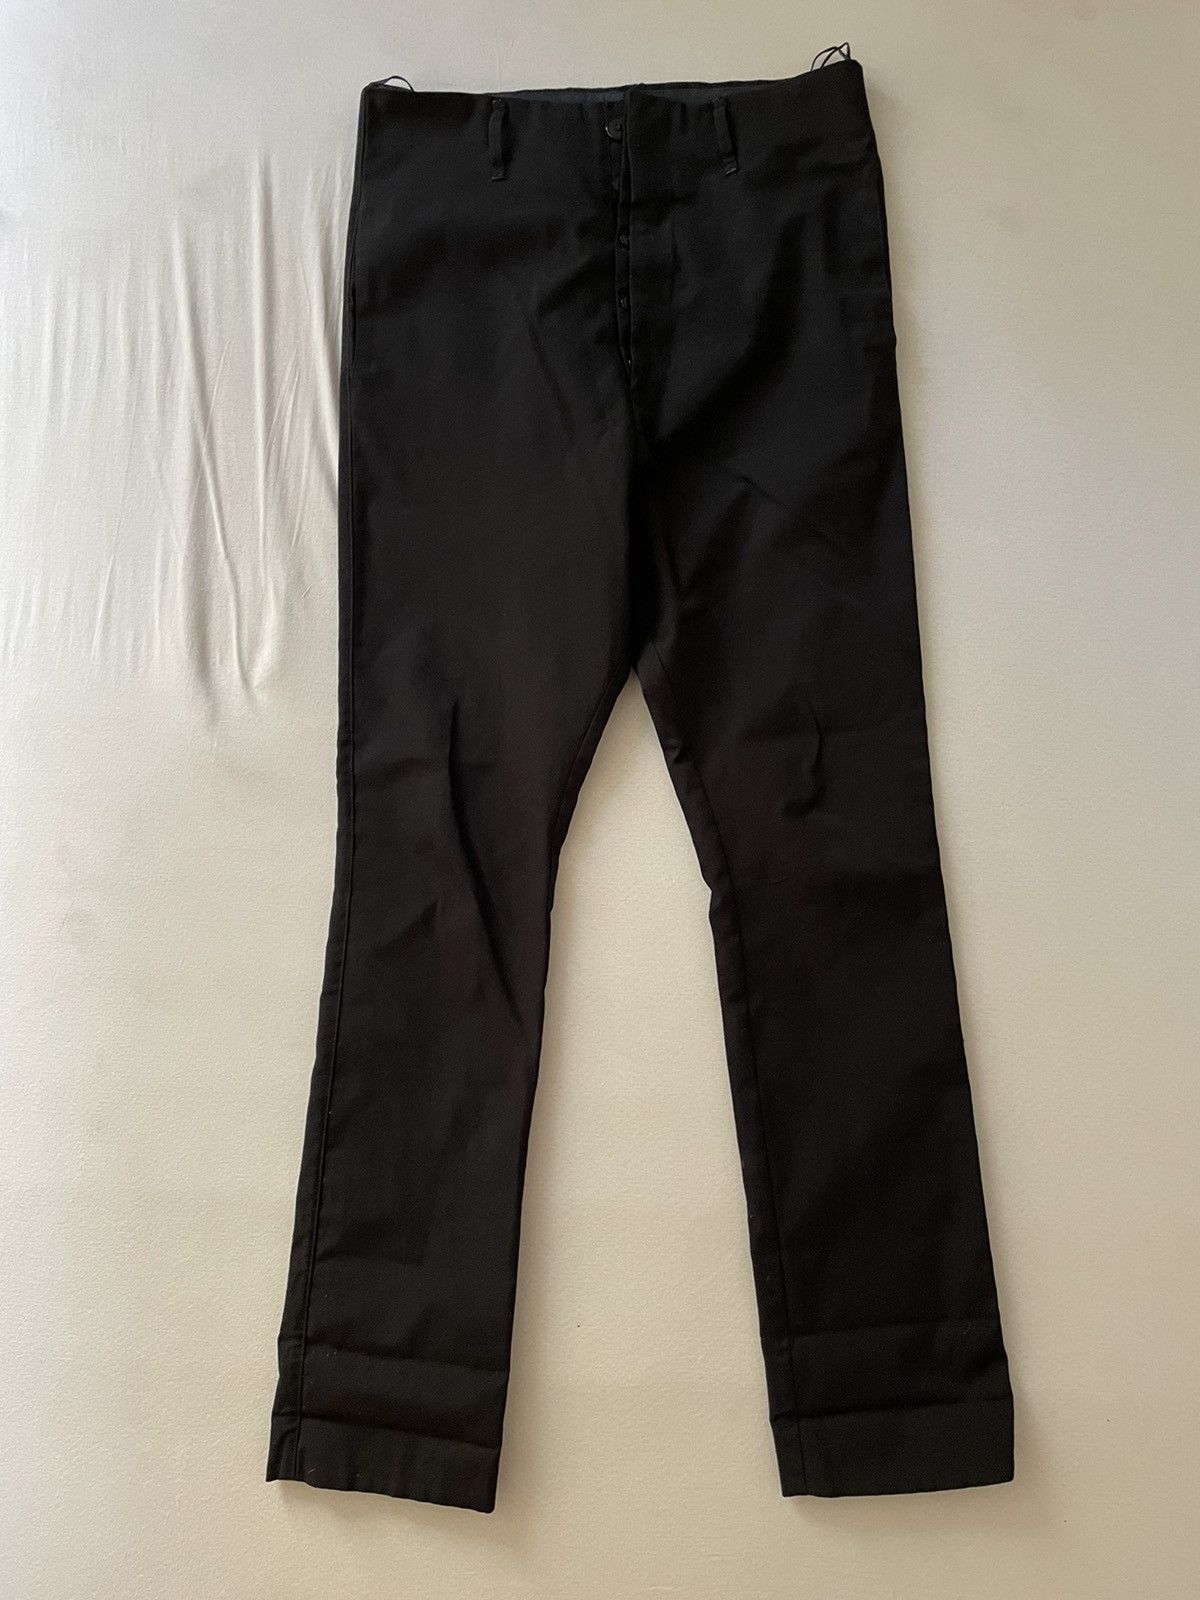 Carol Christian Poell Deepti P-006 Trousers, Size 48 | Grailed